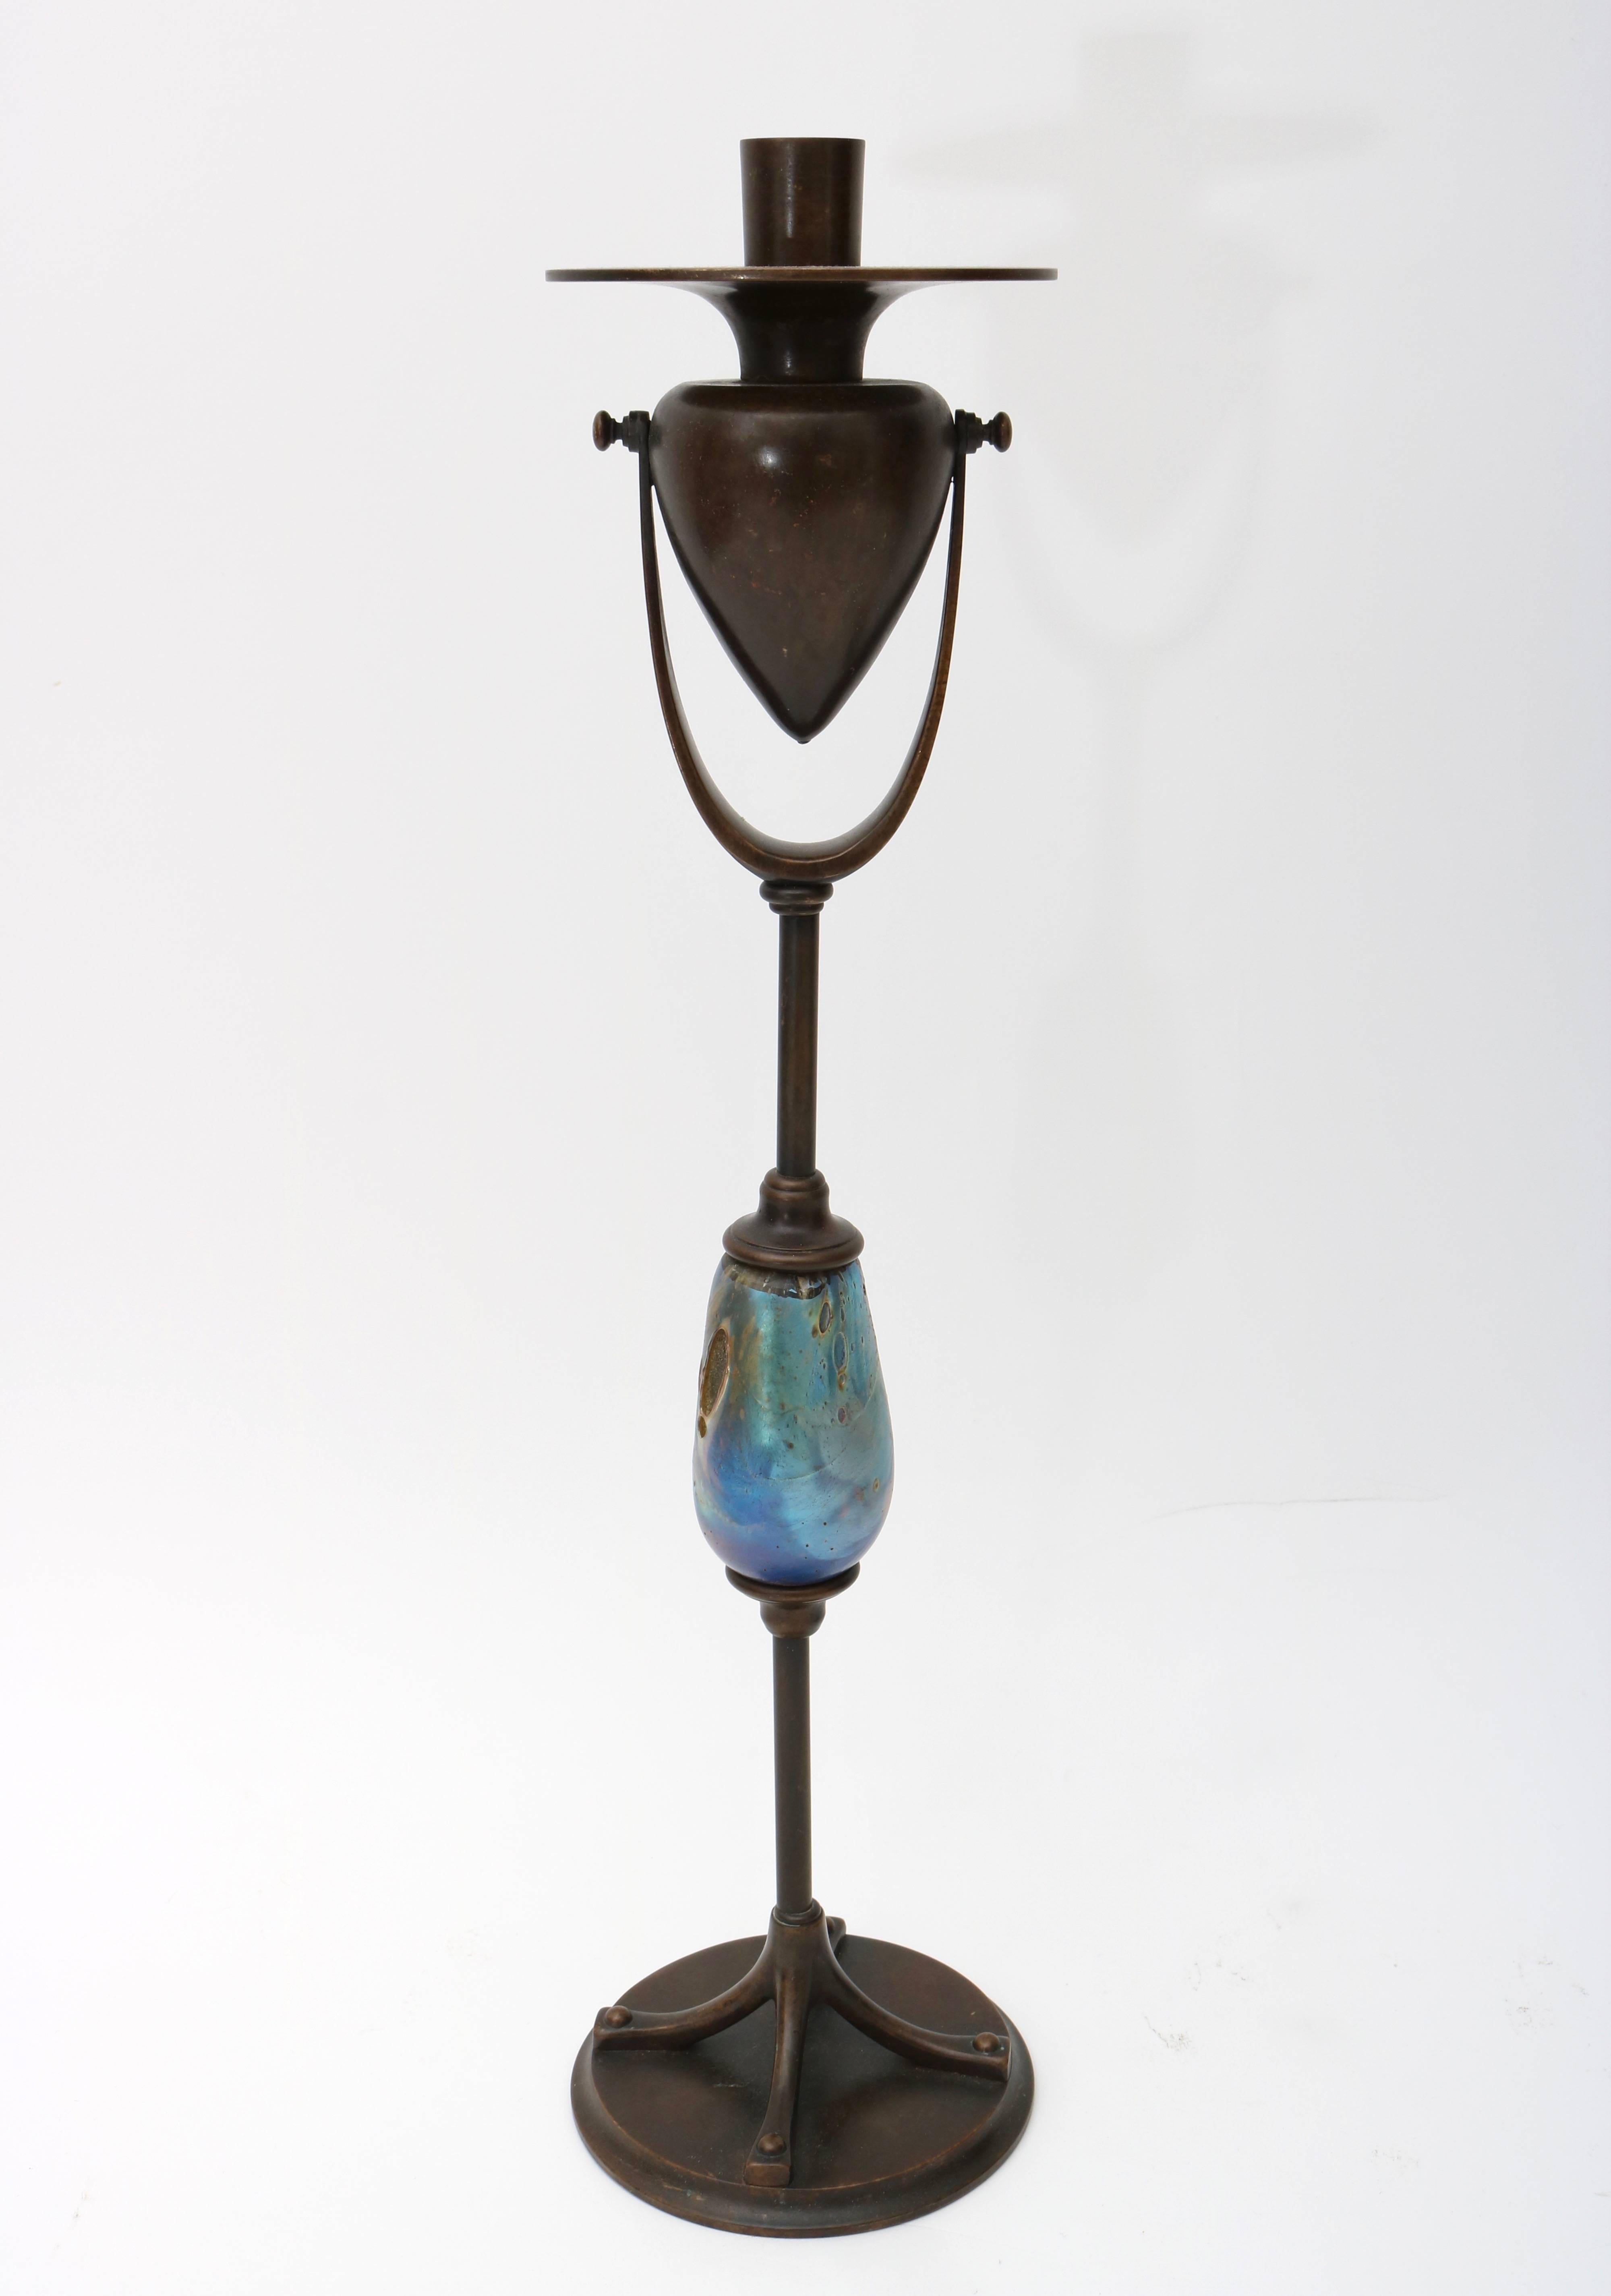 Pair of Candlesticks, Louis C. Tiffany Furnaces Inc, Bronze and Favrile Glass In Excellent Condition For Sale In West Palm Beach, FL